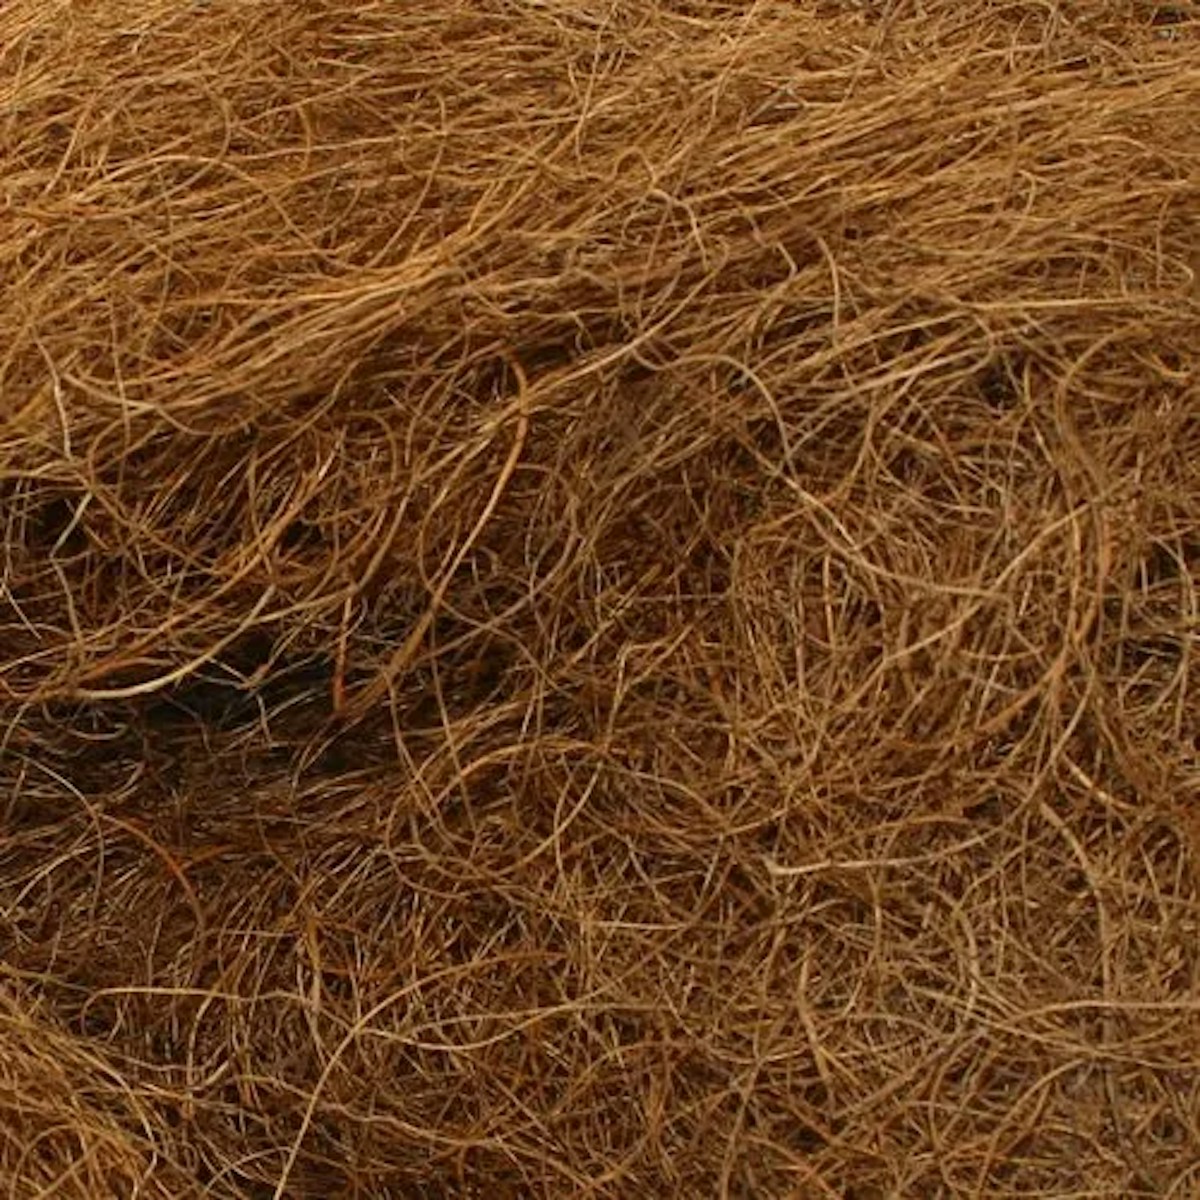 Close up of horse coir stuffing